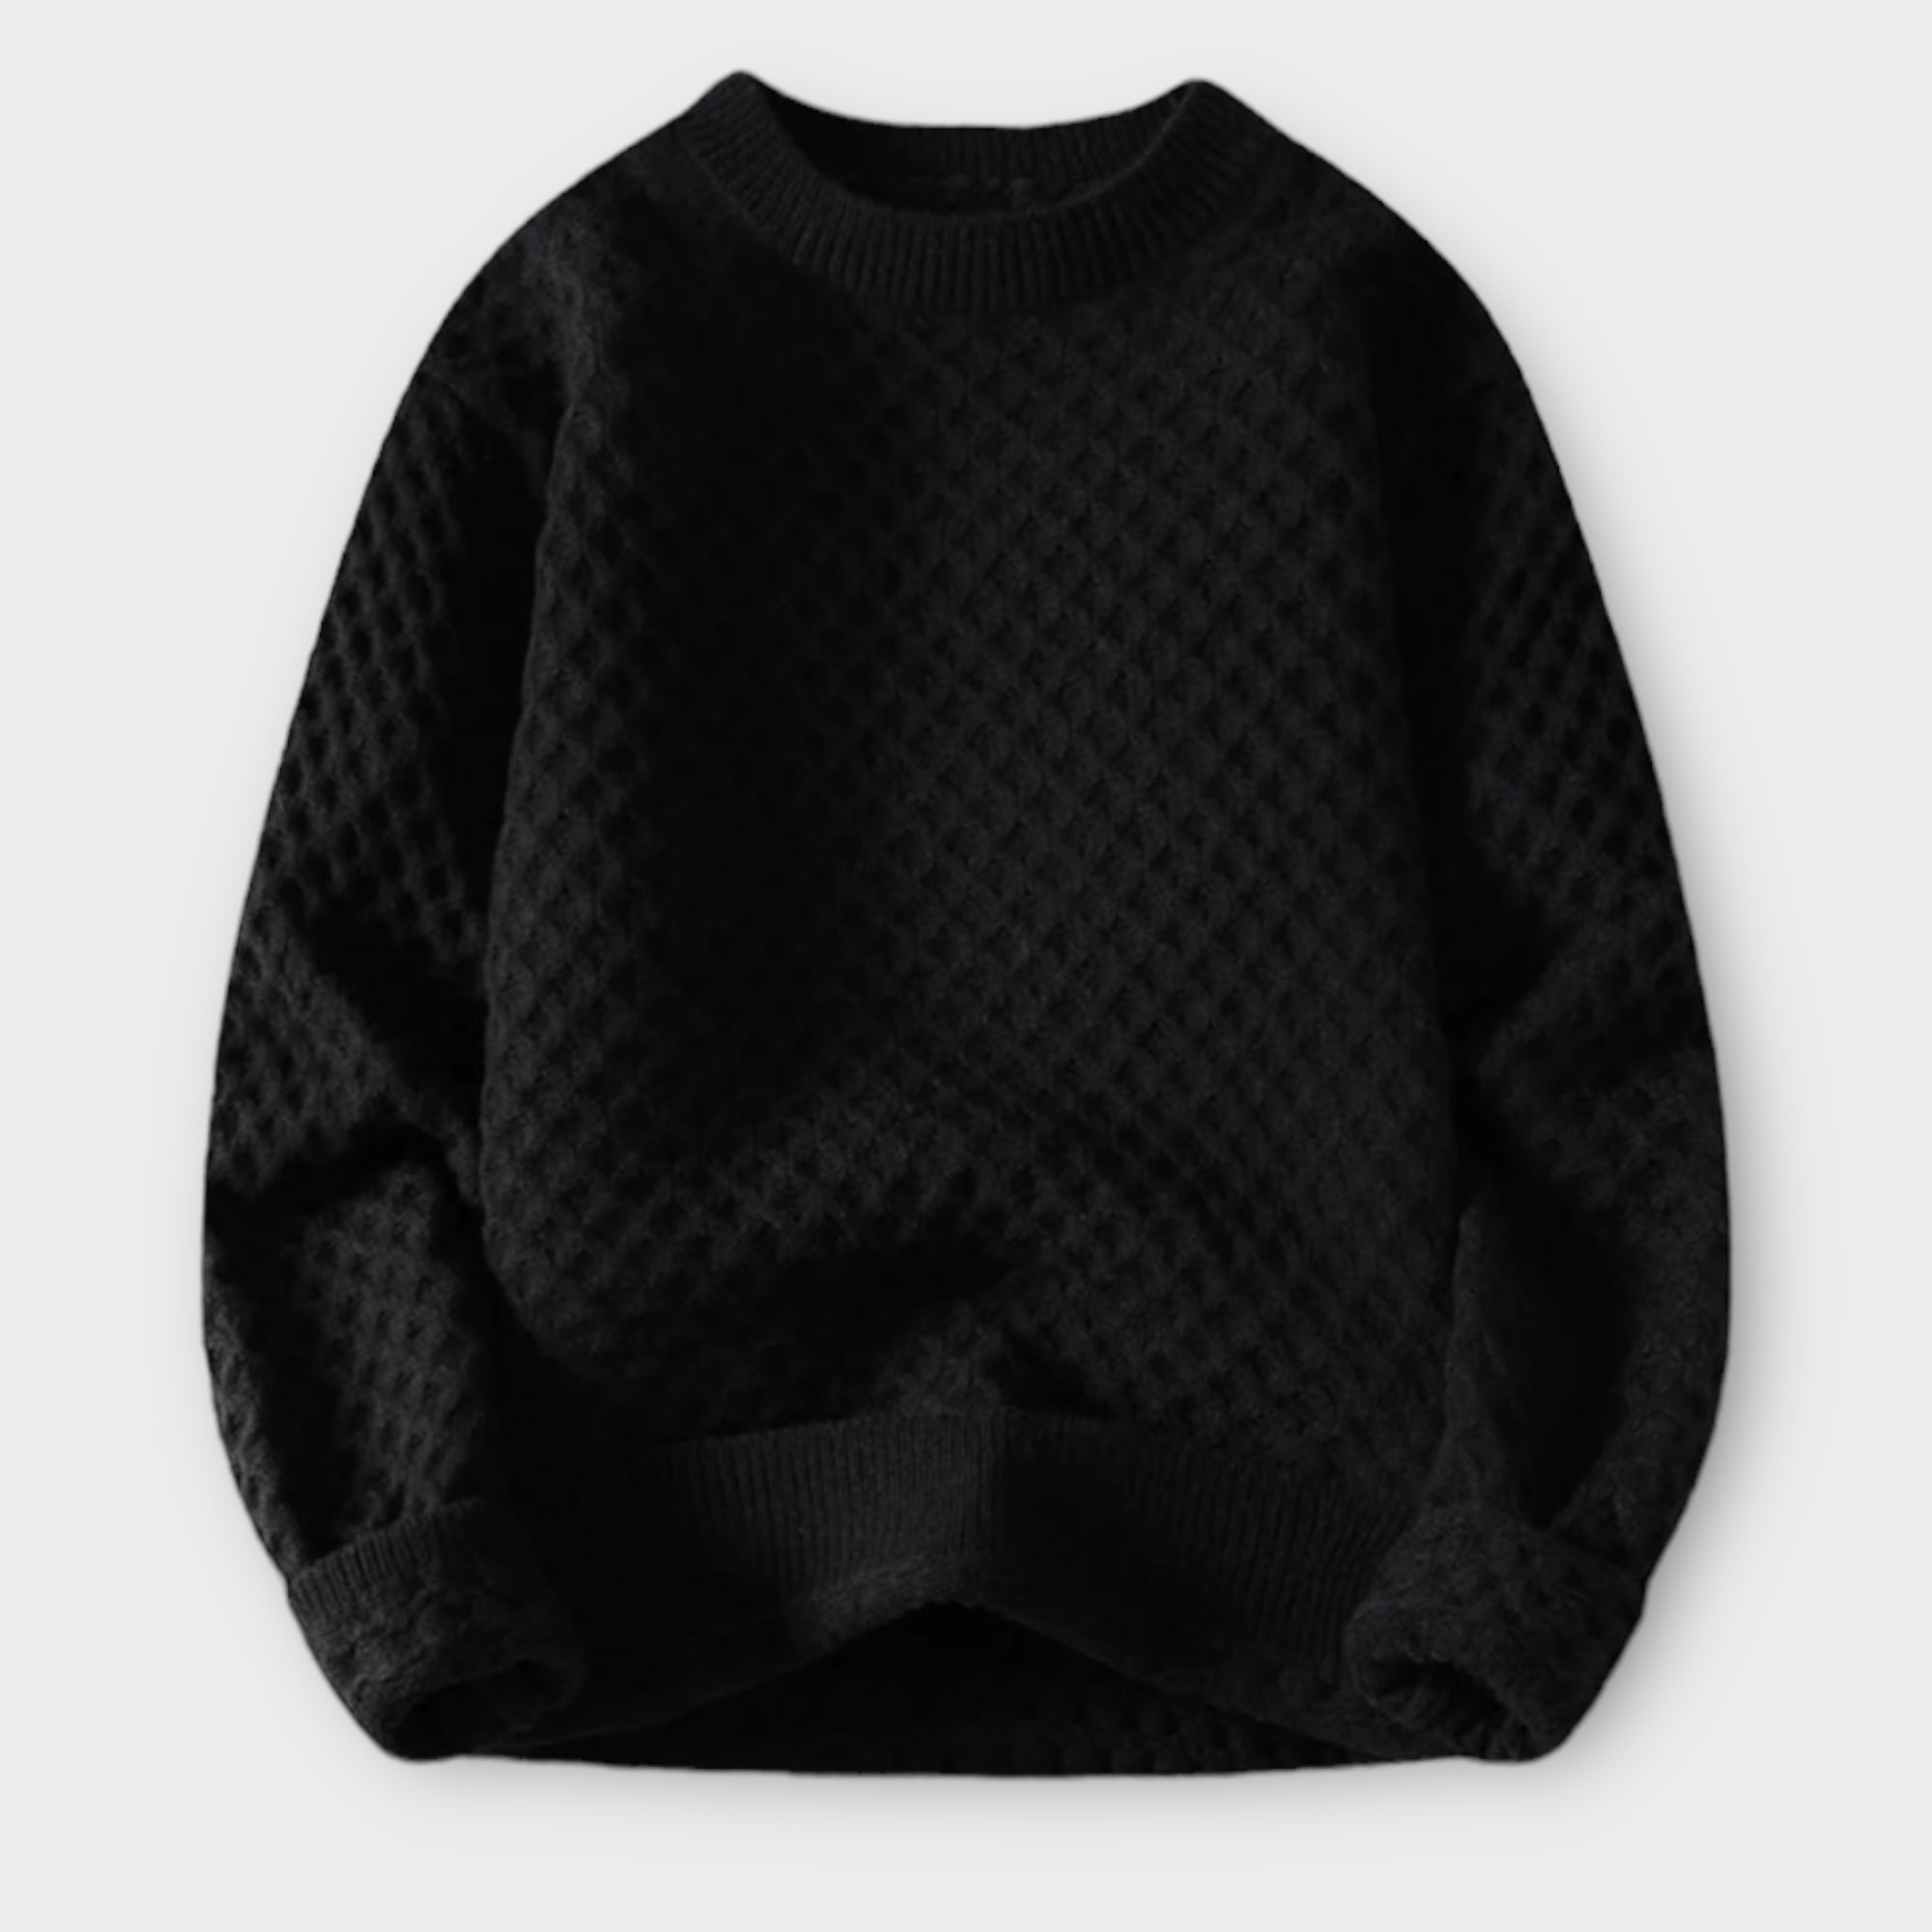 'DSFE' New knitted sweater one color for men